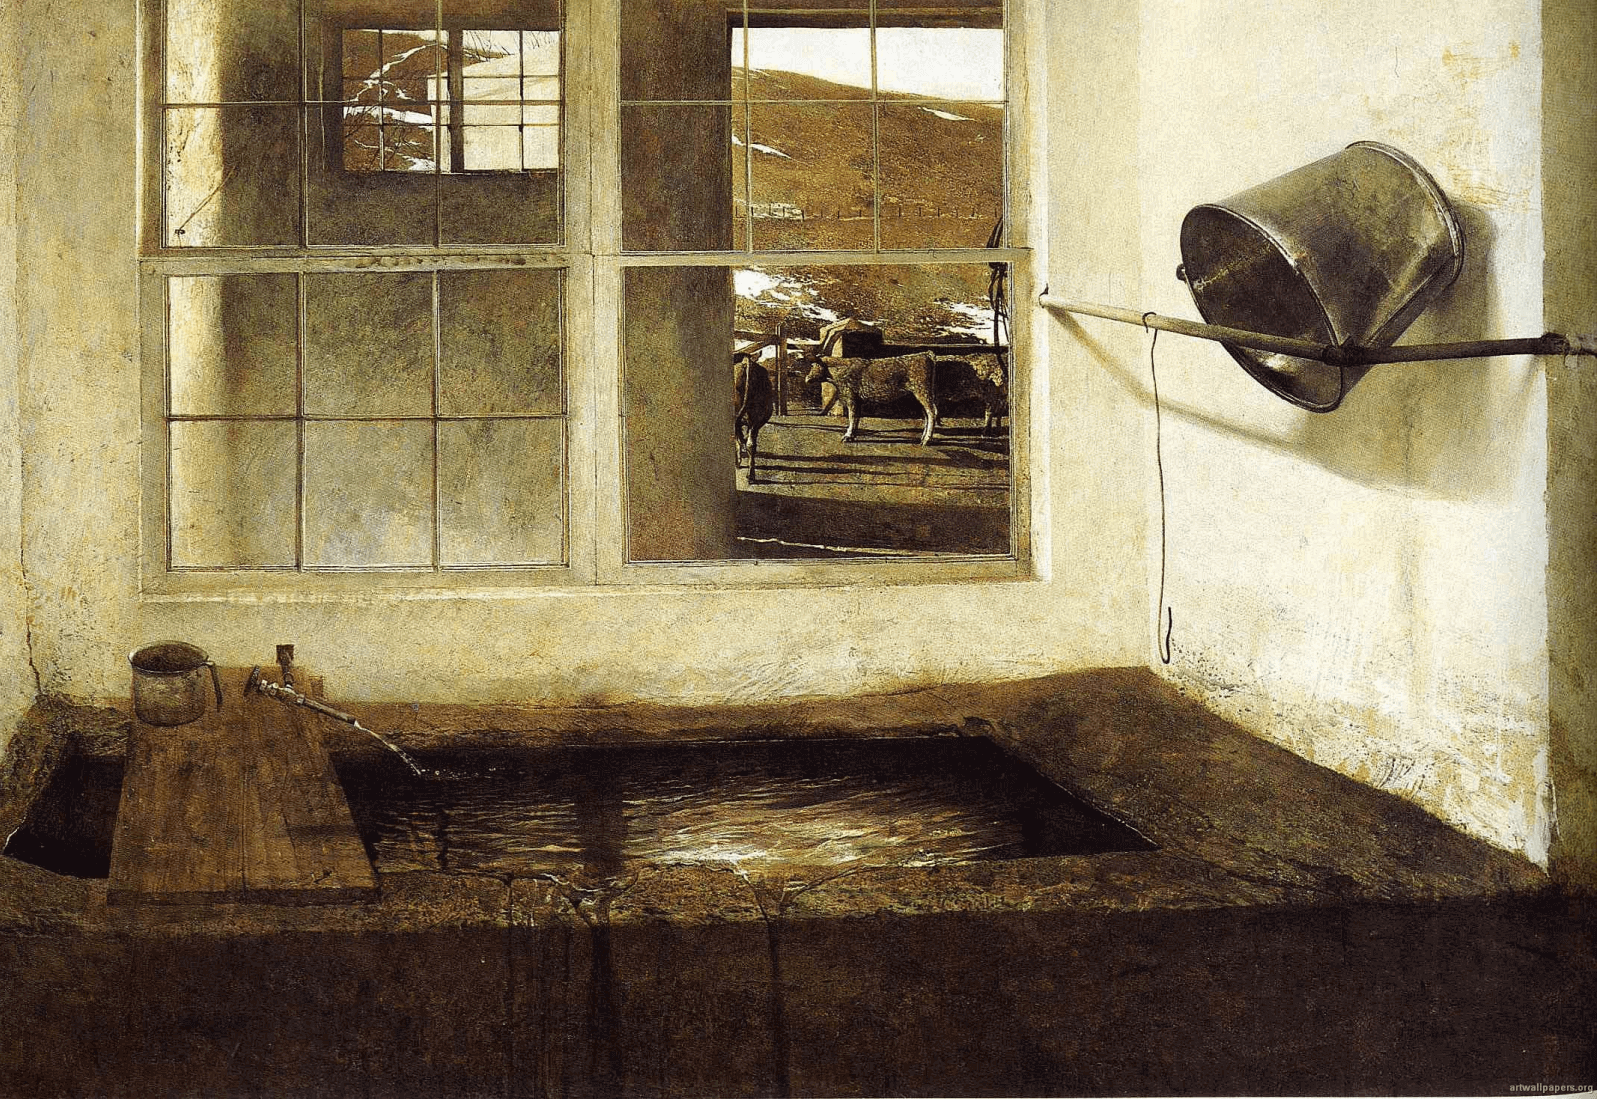 Andrew Wyeth, Spring Fed, 1967, tempera on panel, 27.5 x 39.5 inches (collection of Mr. and Mrs. W. D. Weiss (© 2017 Andrew Wyeth/Artists Rights Society (ARS))